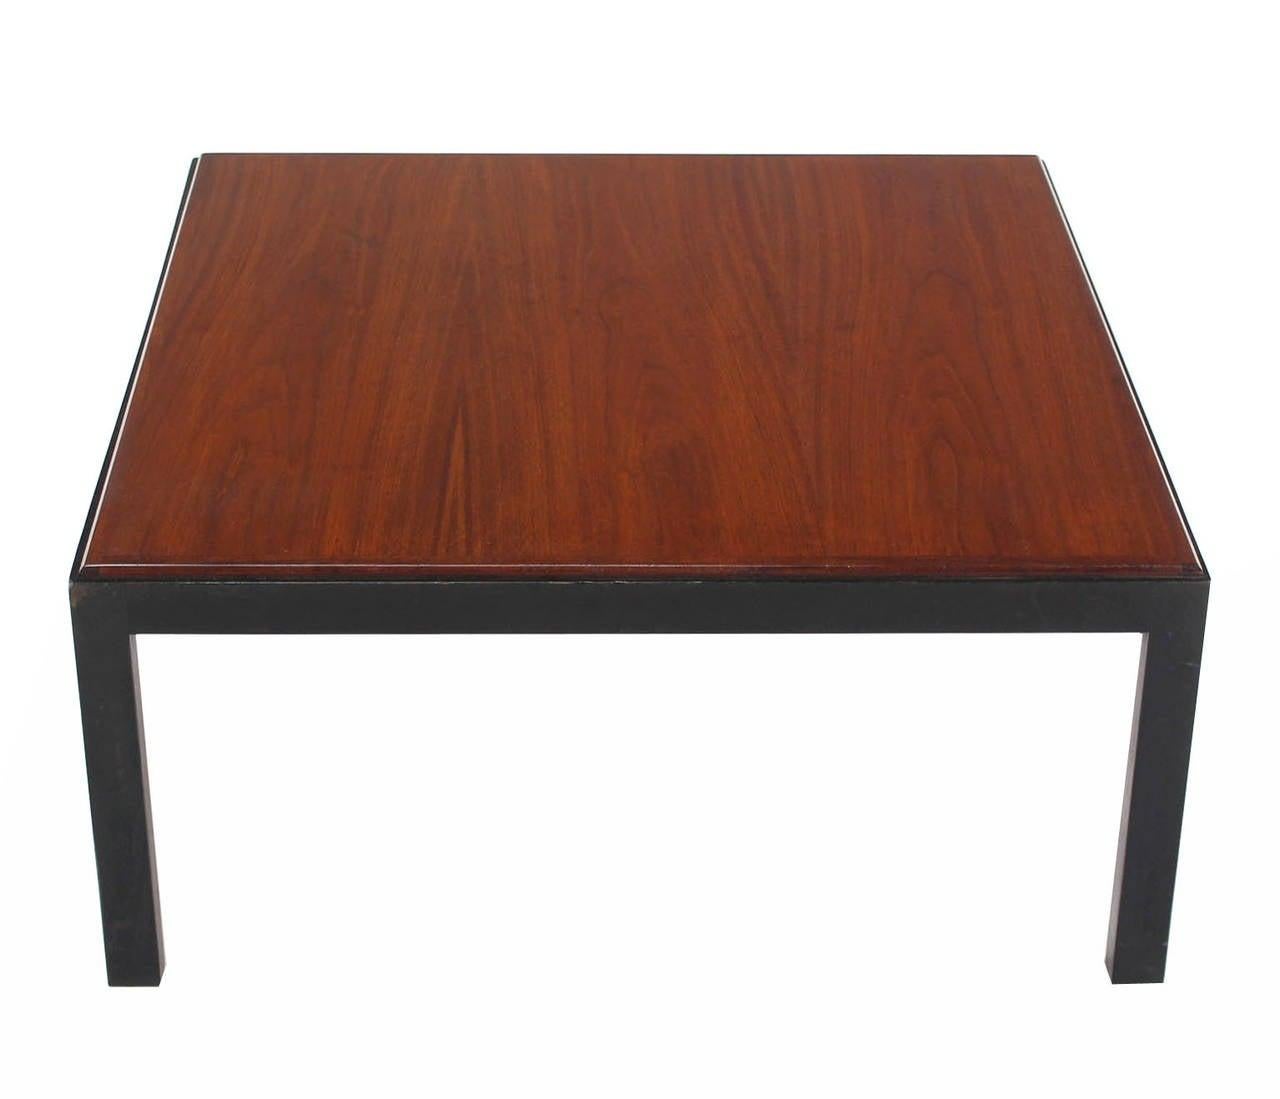 American Mid Century Modern Ebonised Frame Walnut Top Square Coffee Occasional Table MINT For Sale